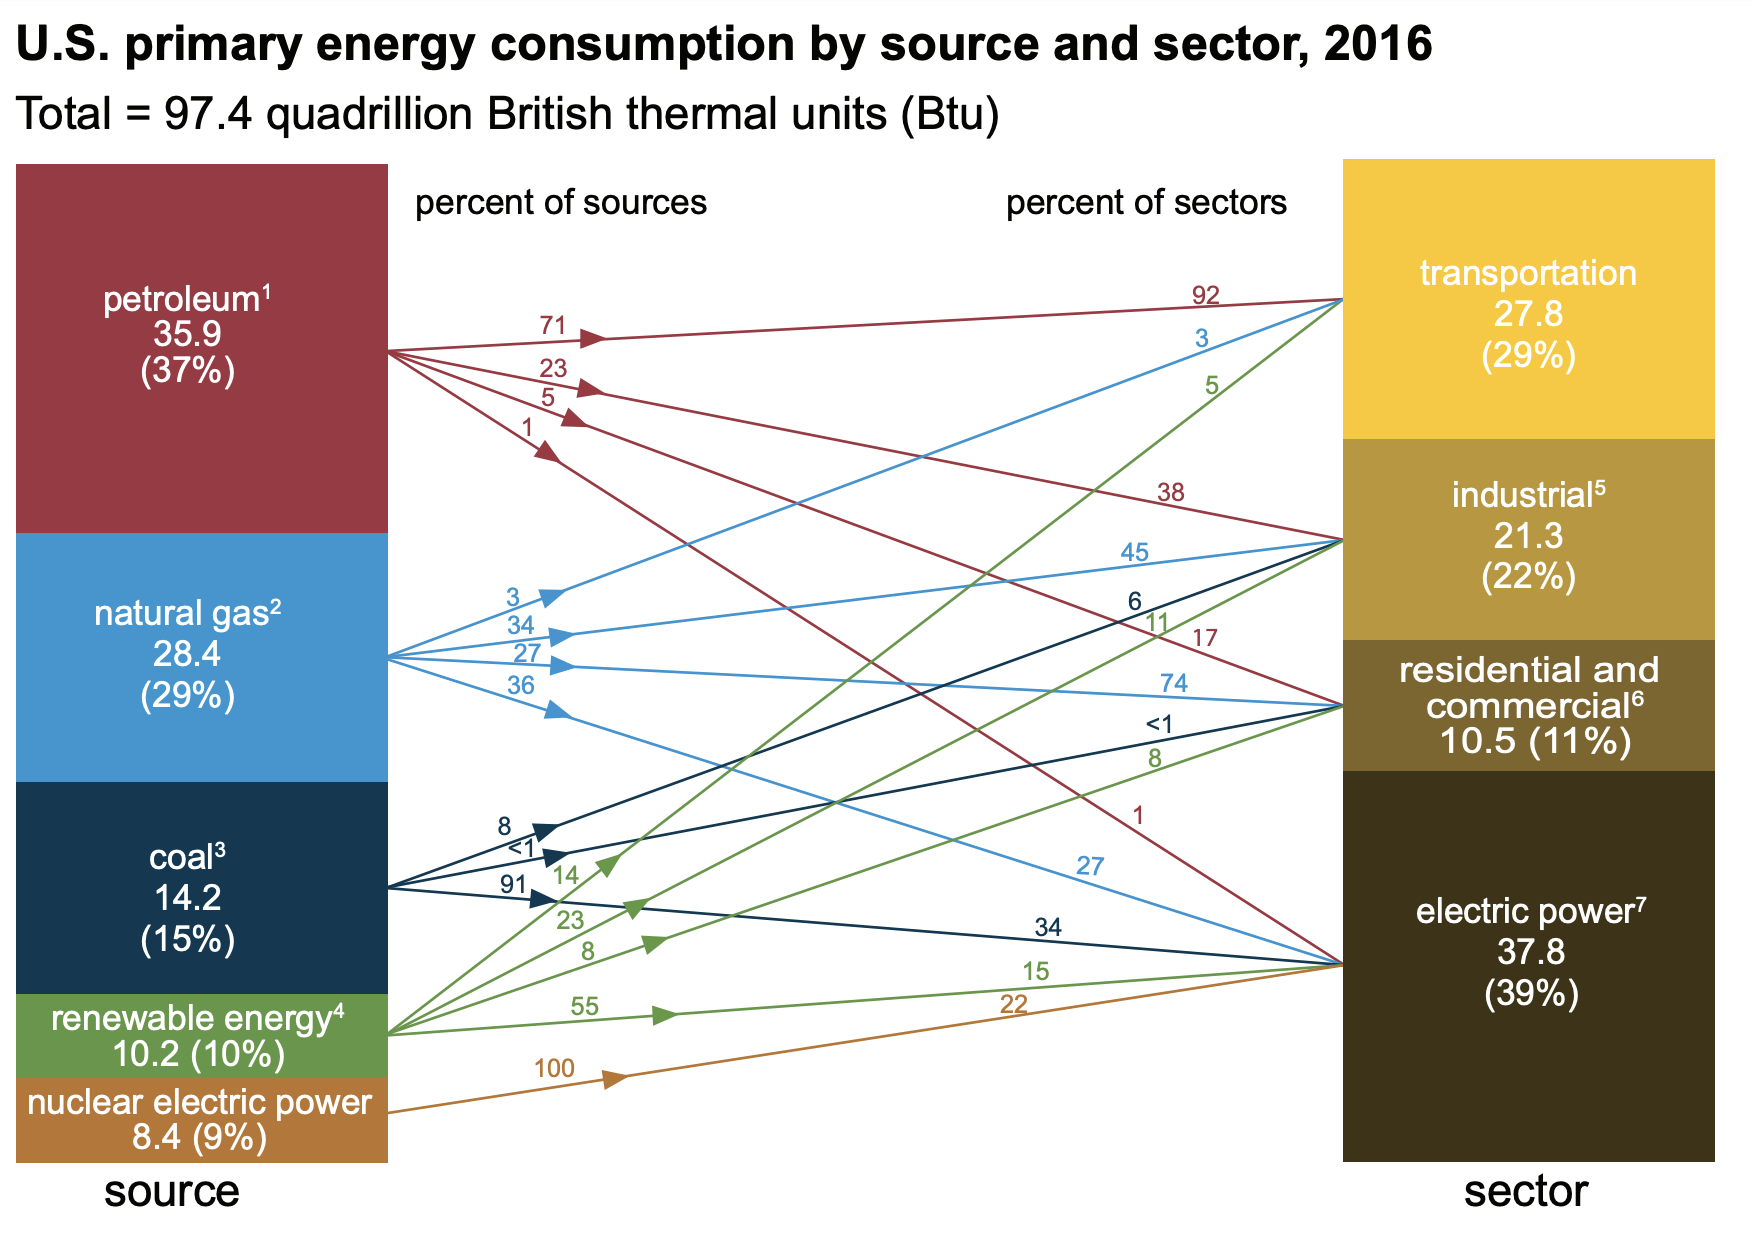 EIA 2016 Source and Sector